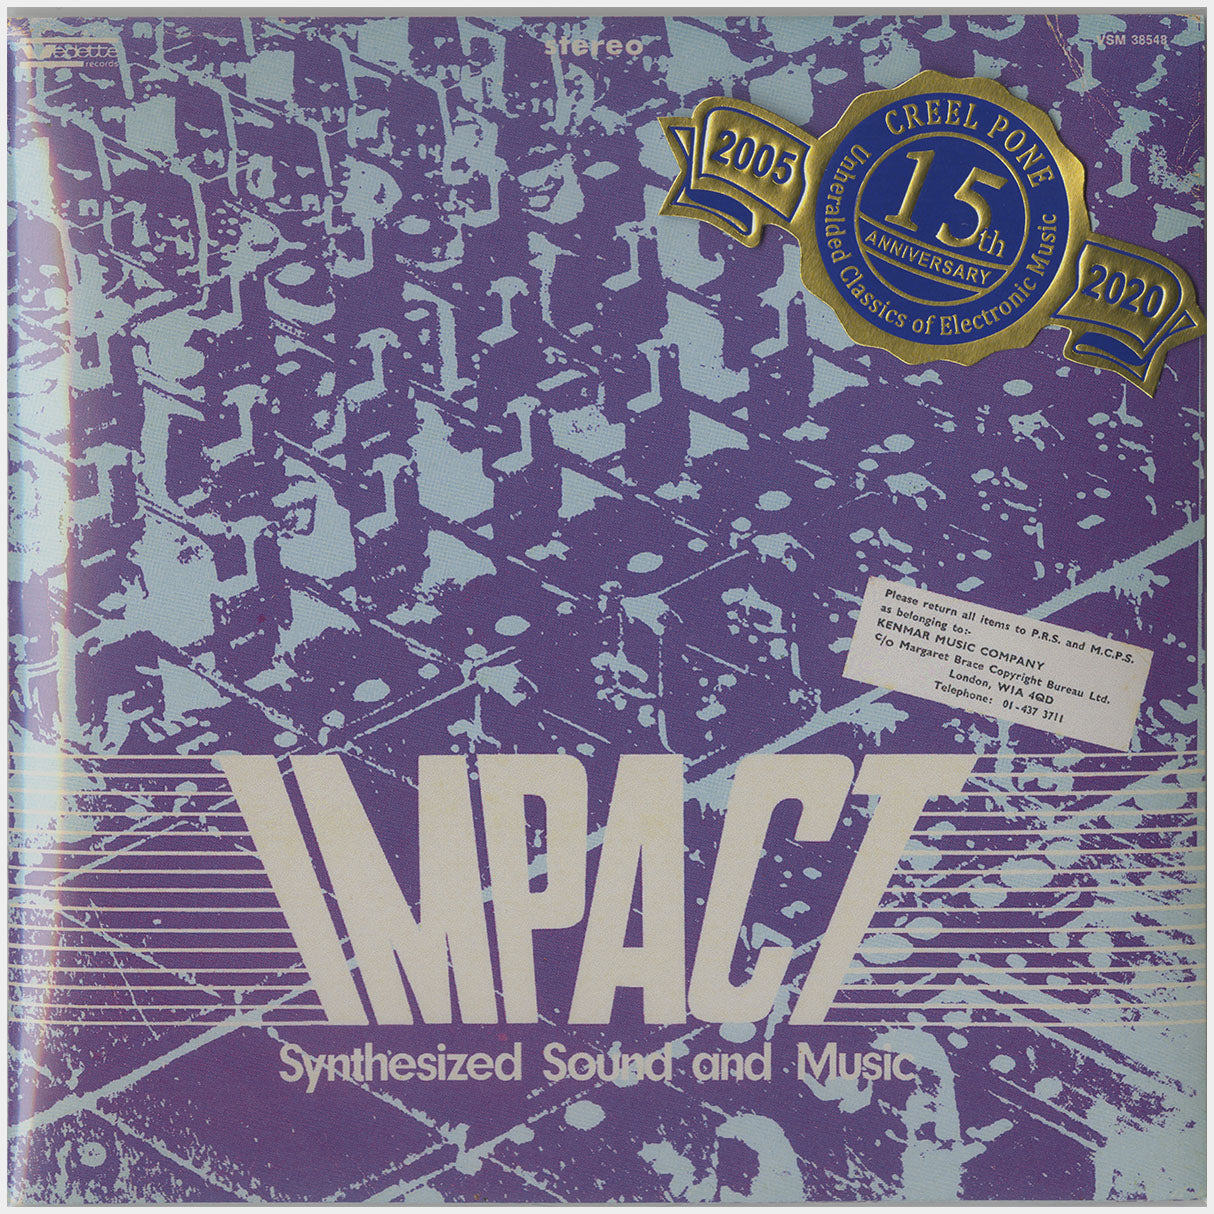 [CP 066 CD] H. Tical; Impact, Synthesized Sound and Music, Nº 37 - Modulations